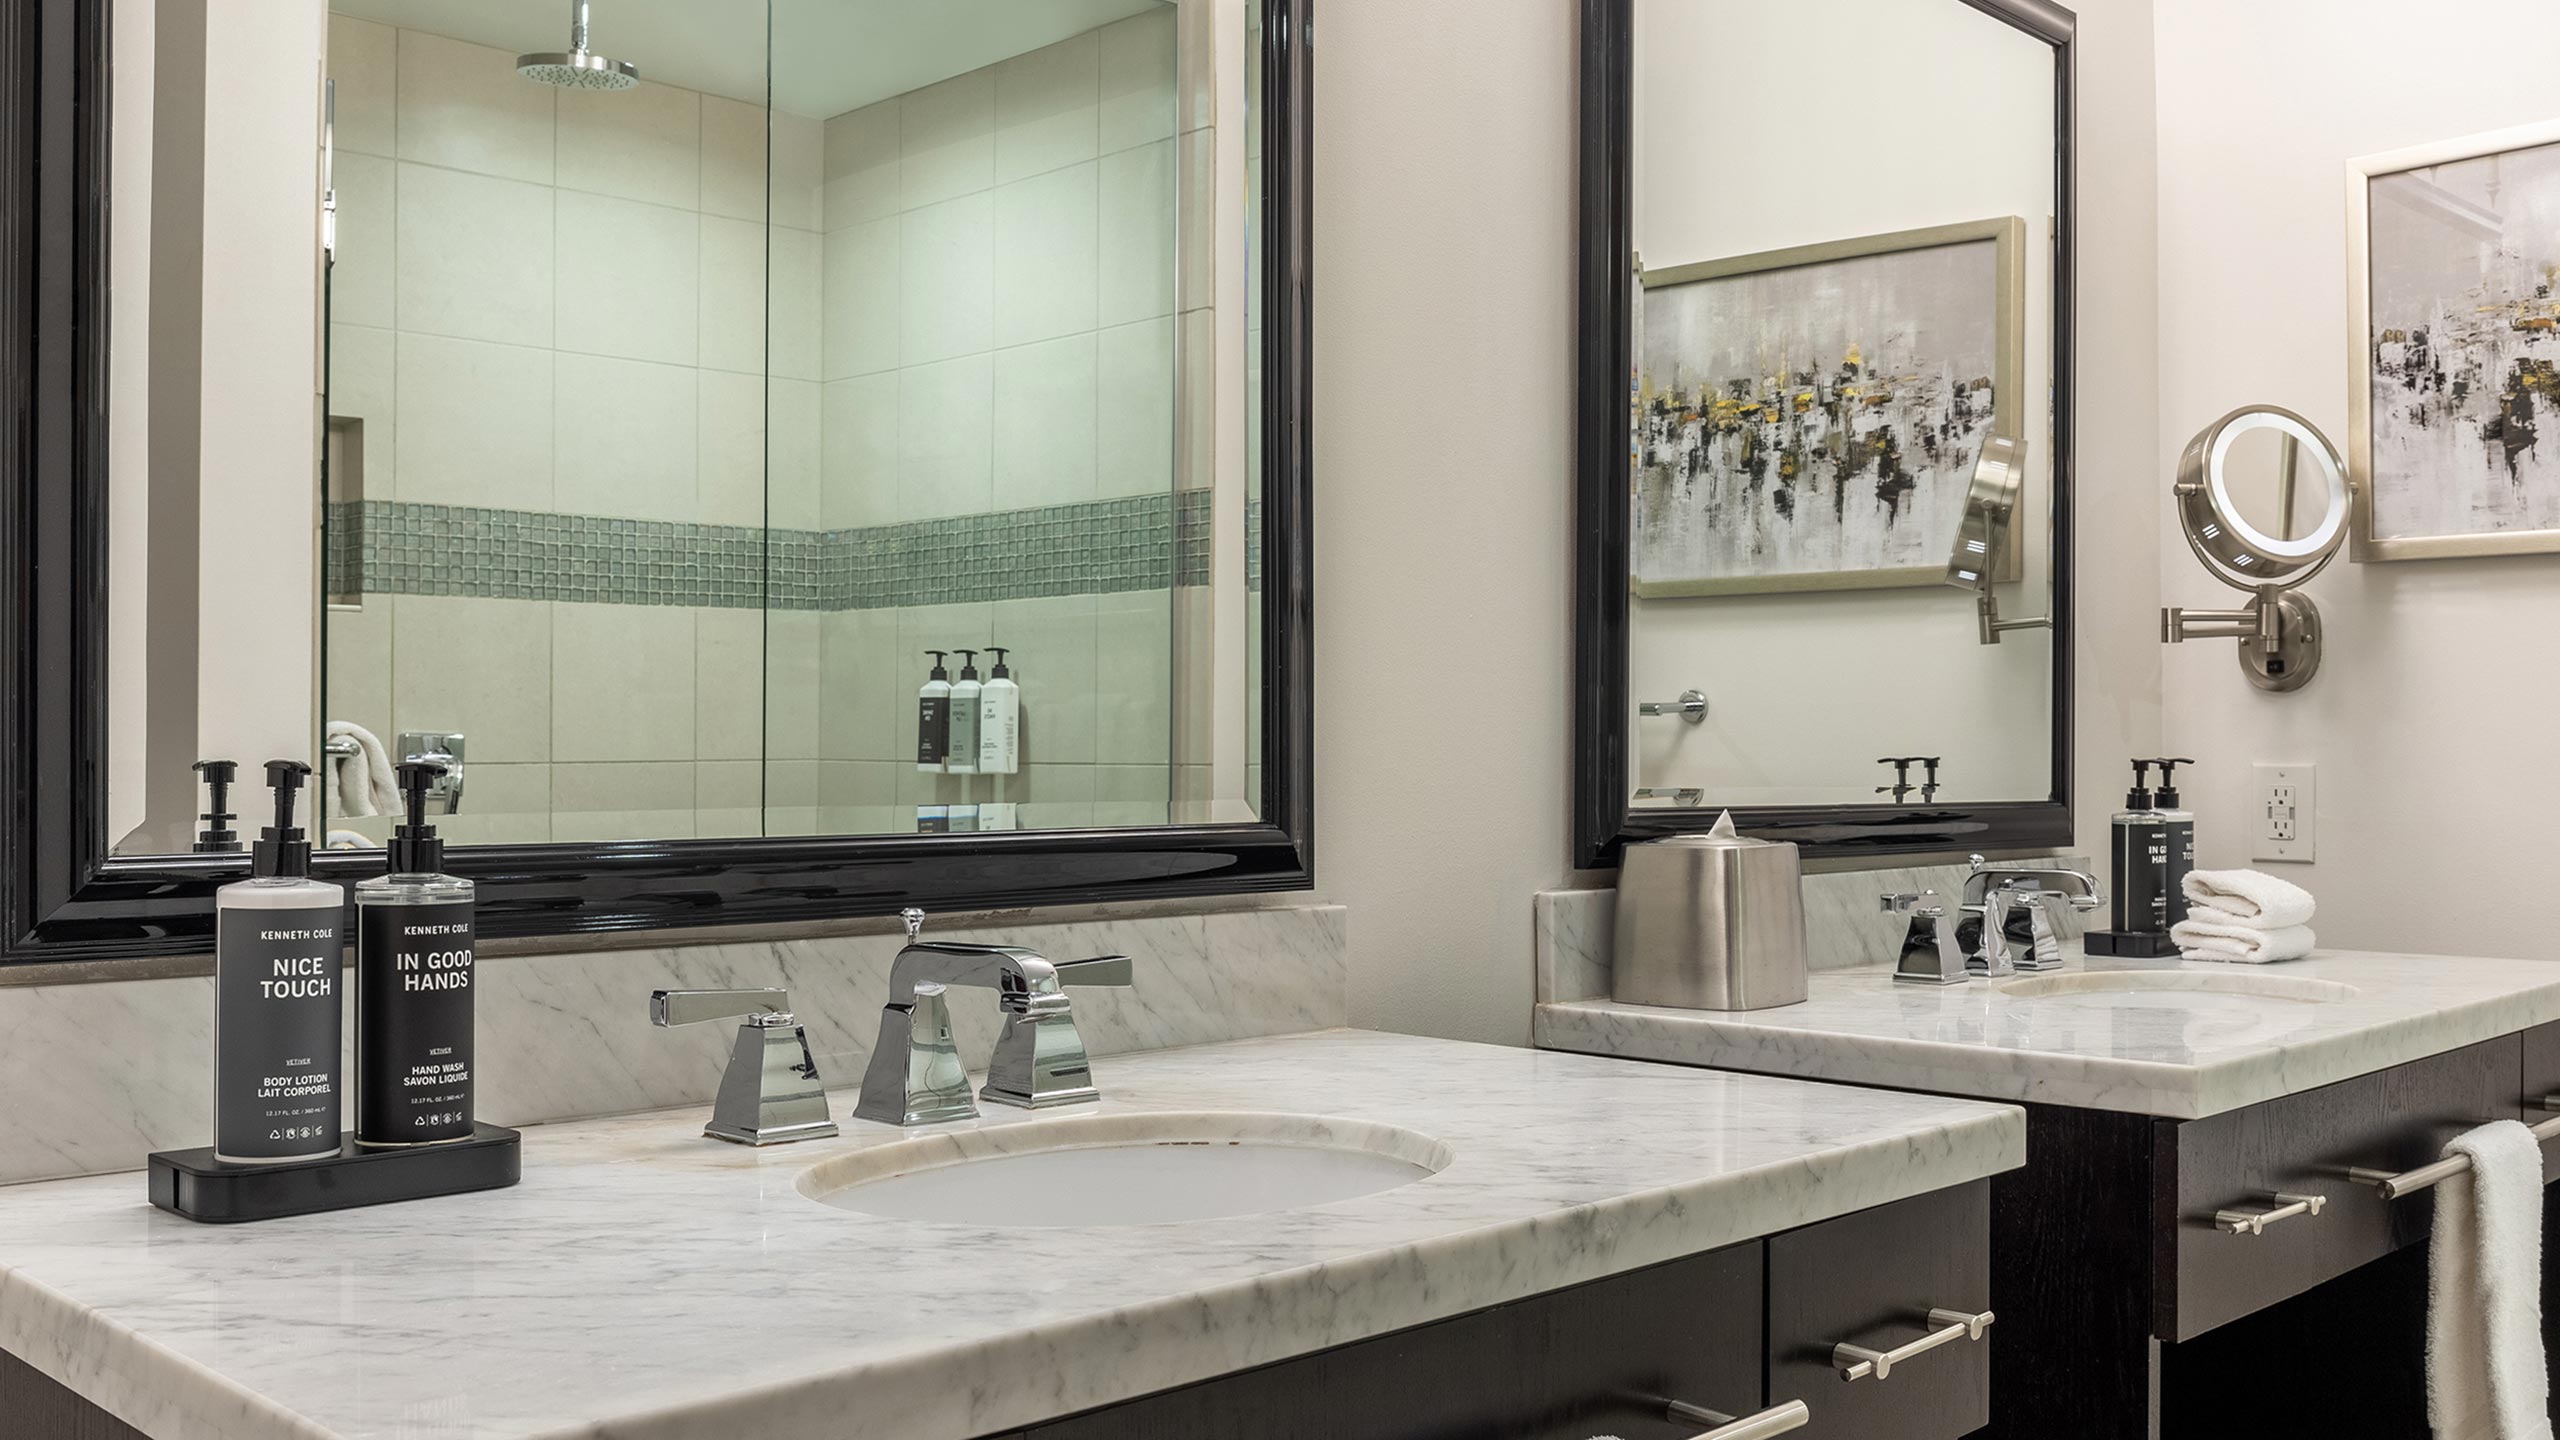 Bathroom in a Presidential Reserve suite with the new Kenneth Cole amenities on the countertop and in the shower, reflected in the mirror